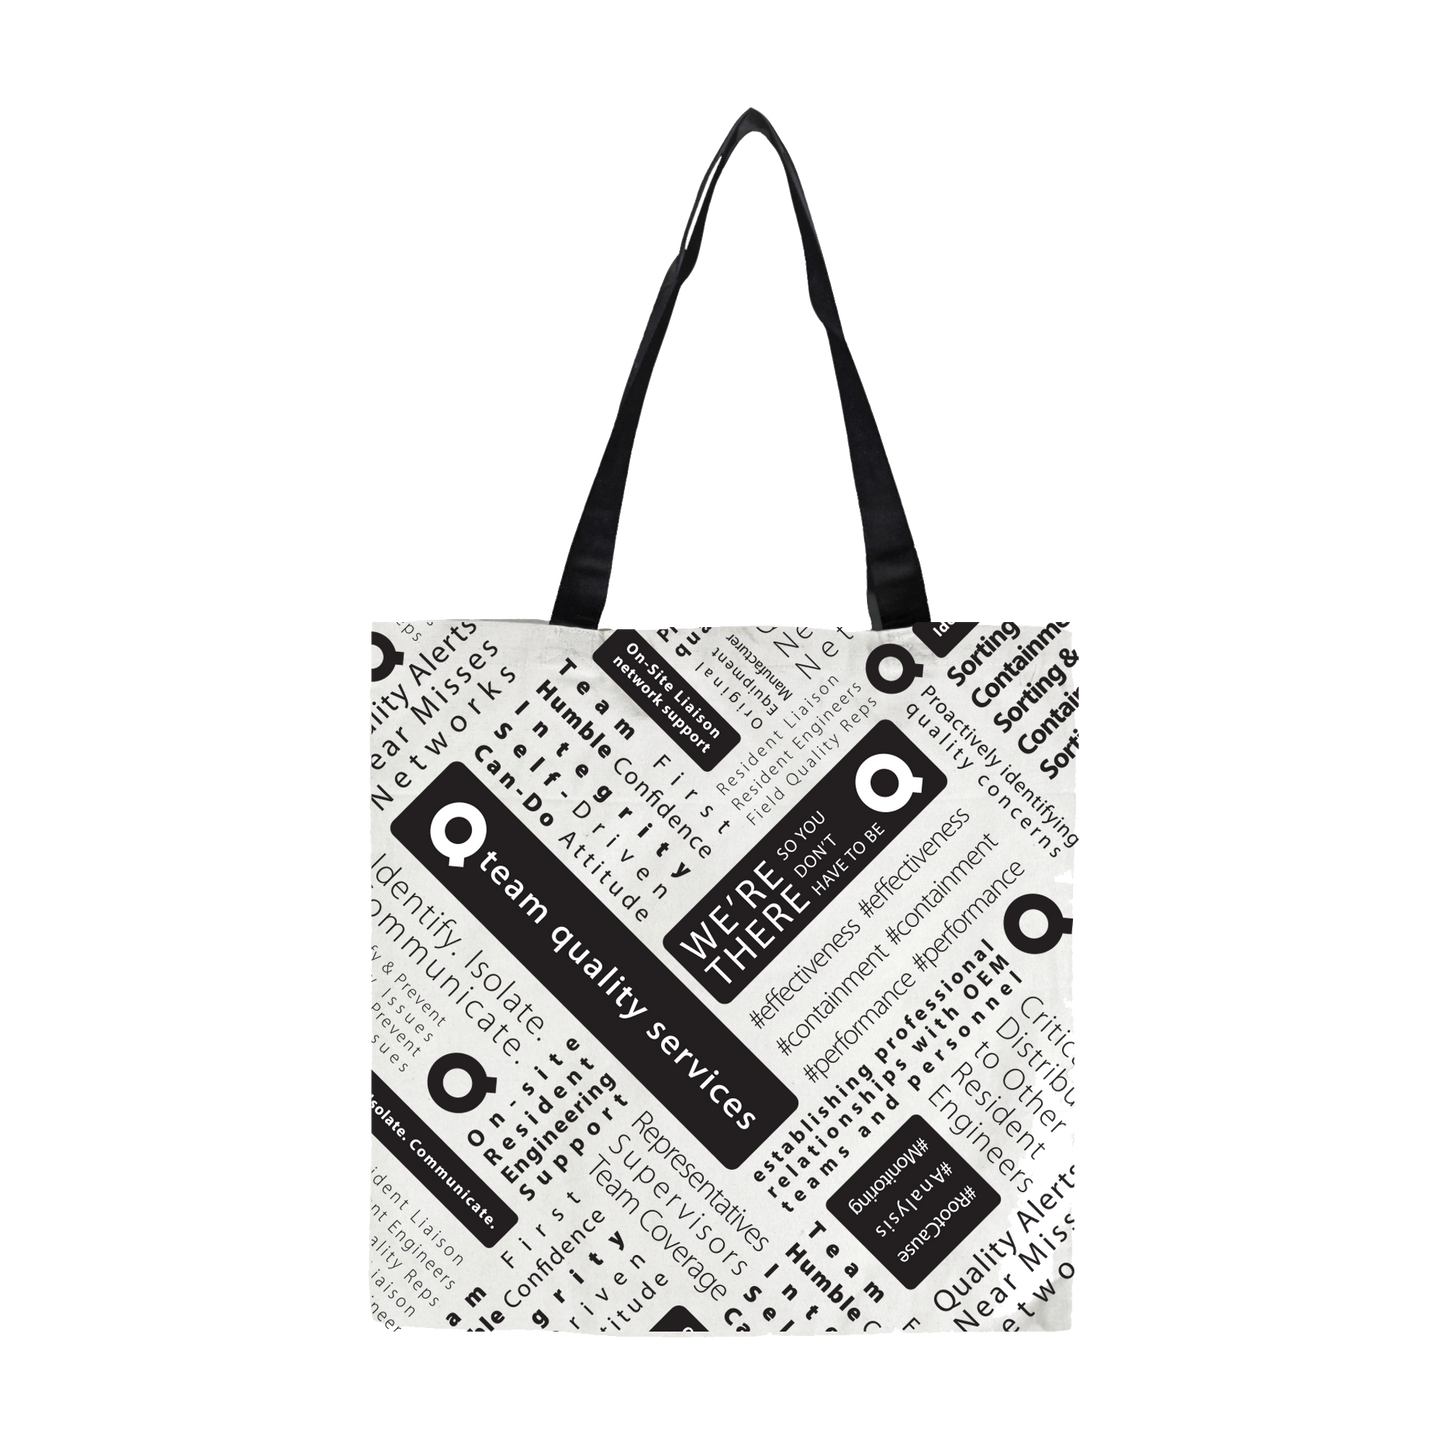 Custom Dye-Sublimated Cotton Tote